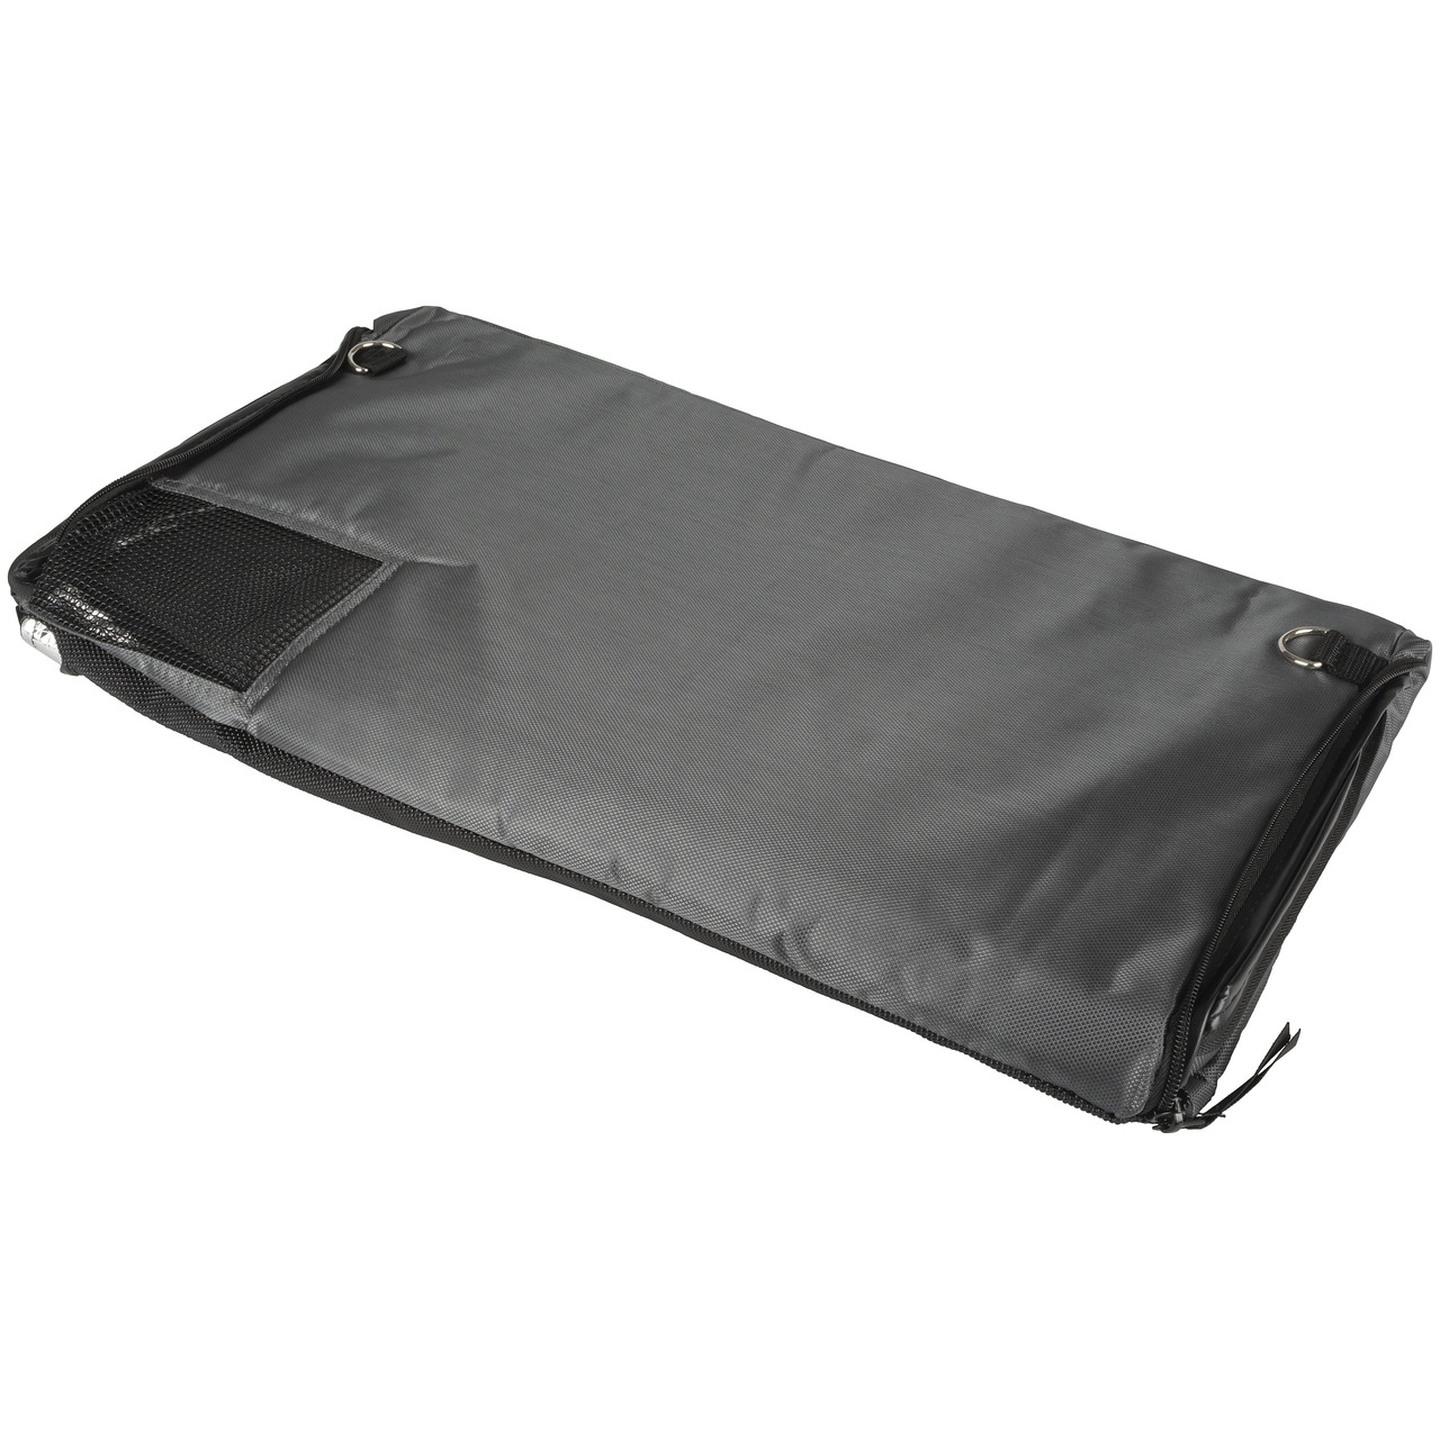 Grey Insulated Cover for 25L Rovin Portable Fridge Freezer